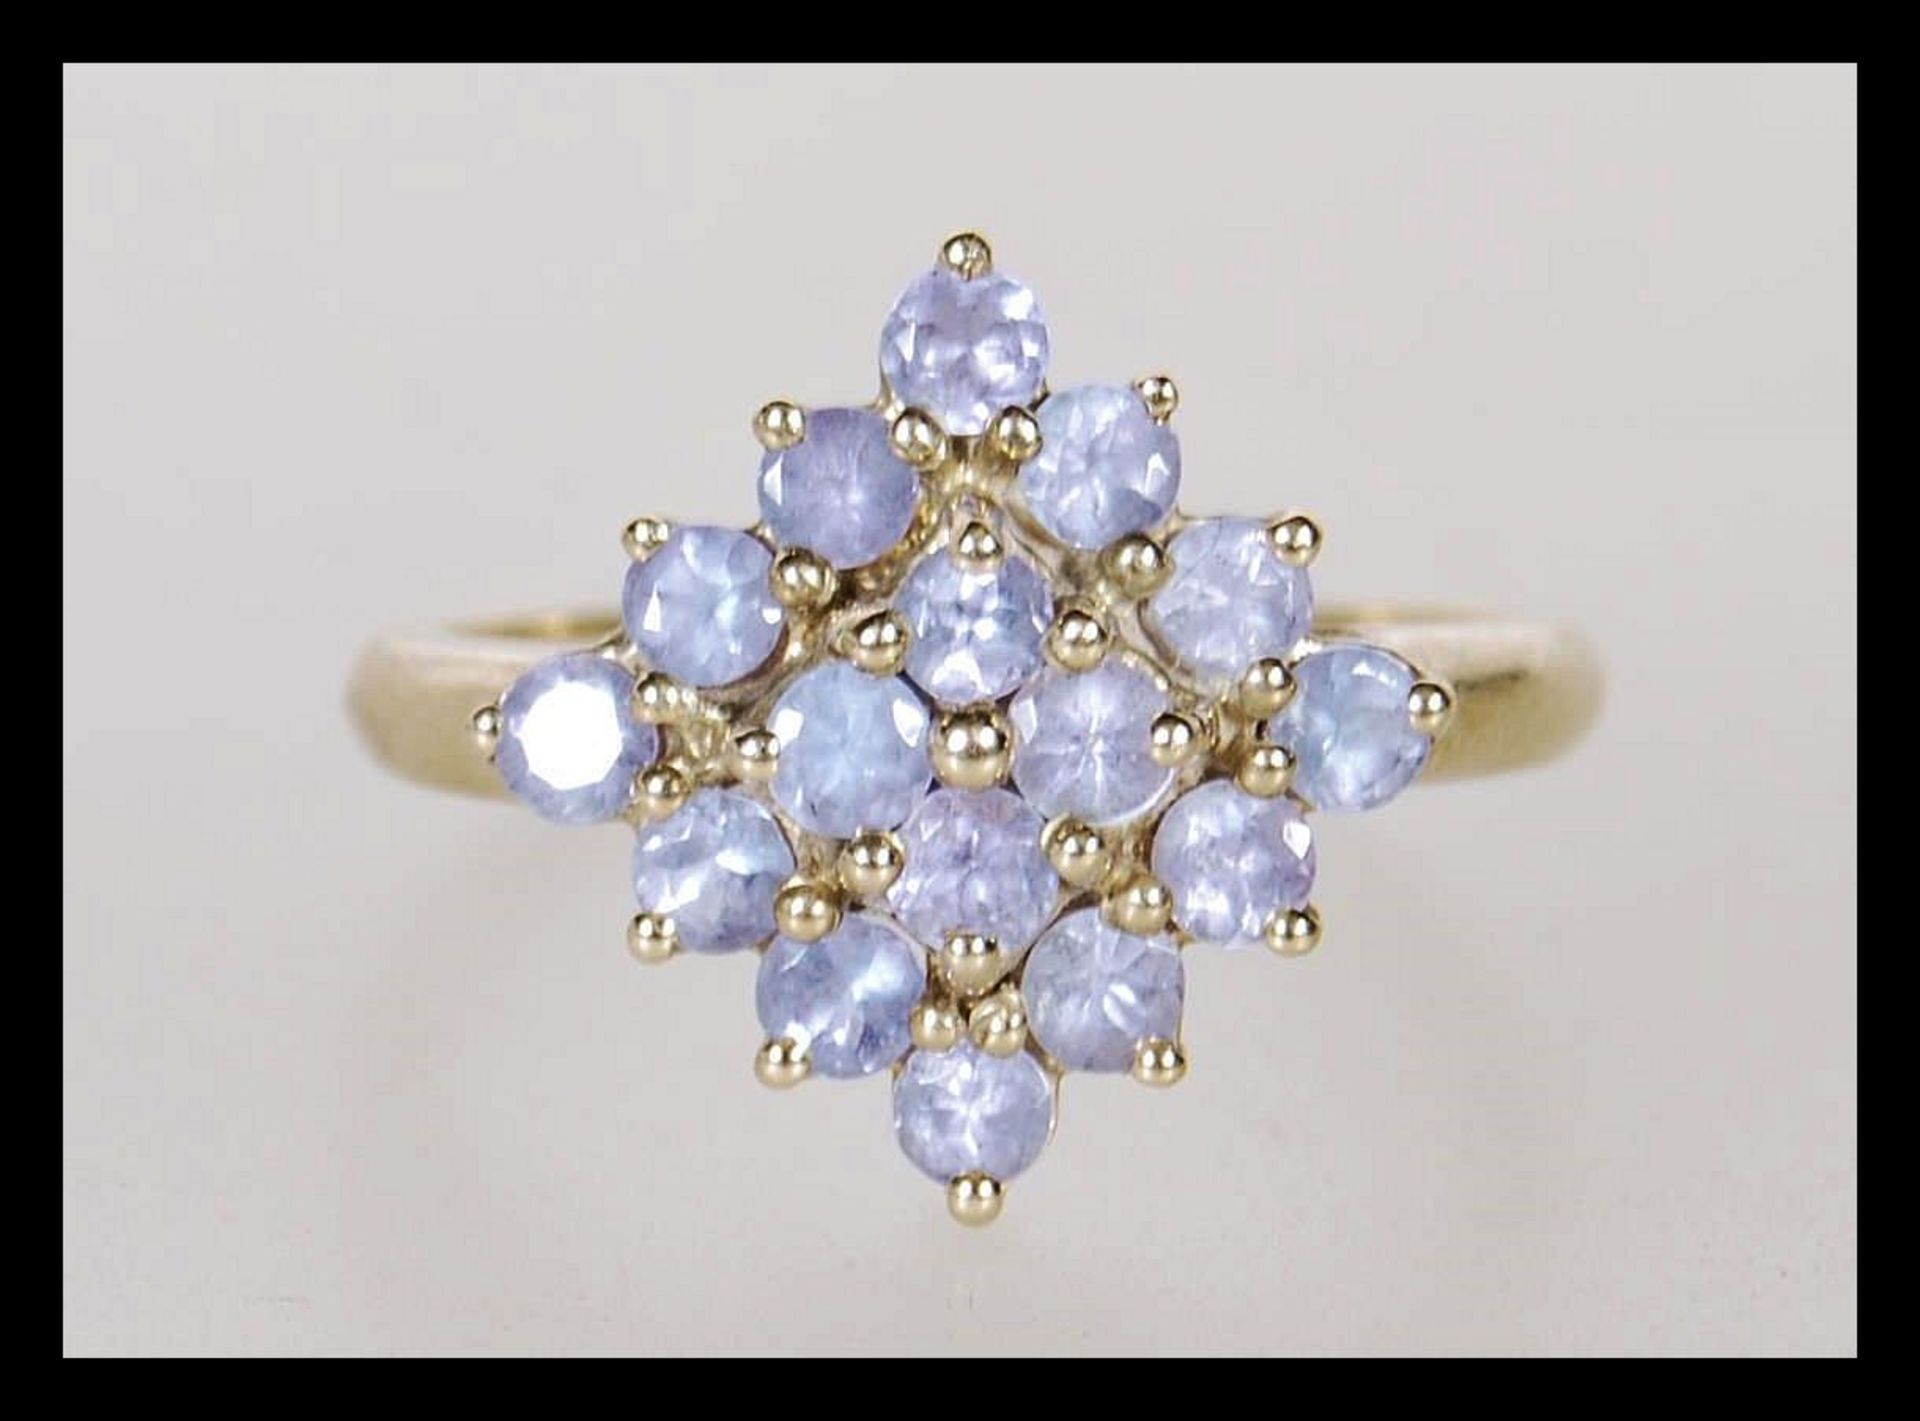 A hallmarked 9ct gold ladies cluster ring prong set with lilac stones in a geometric formation.